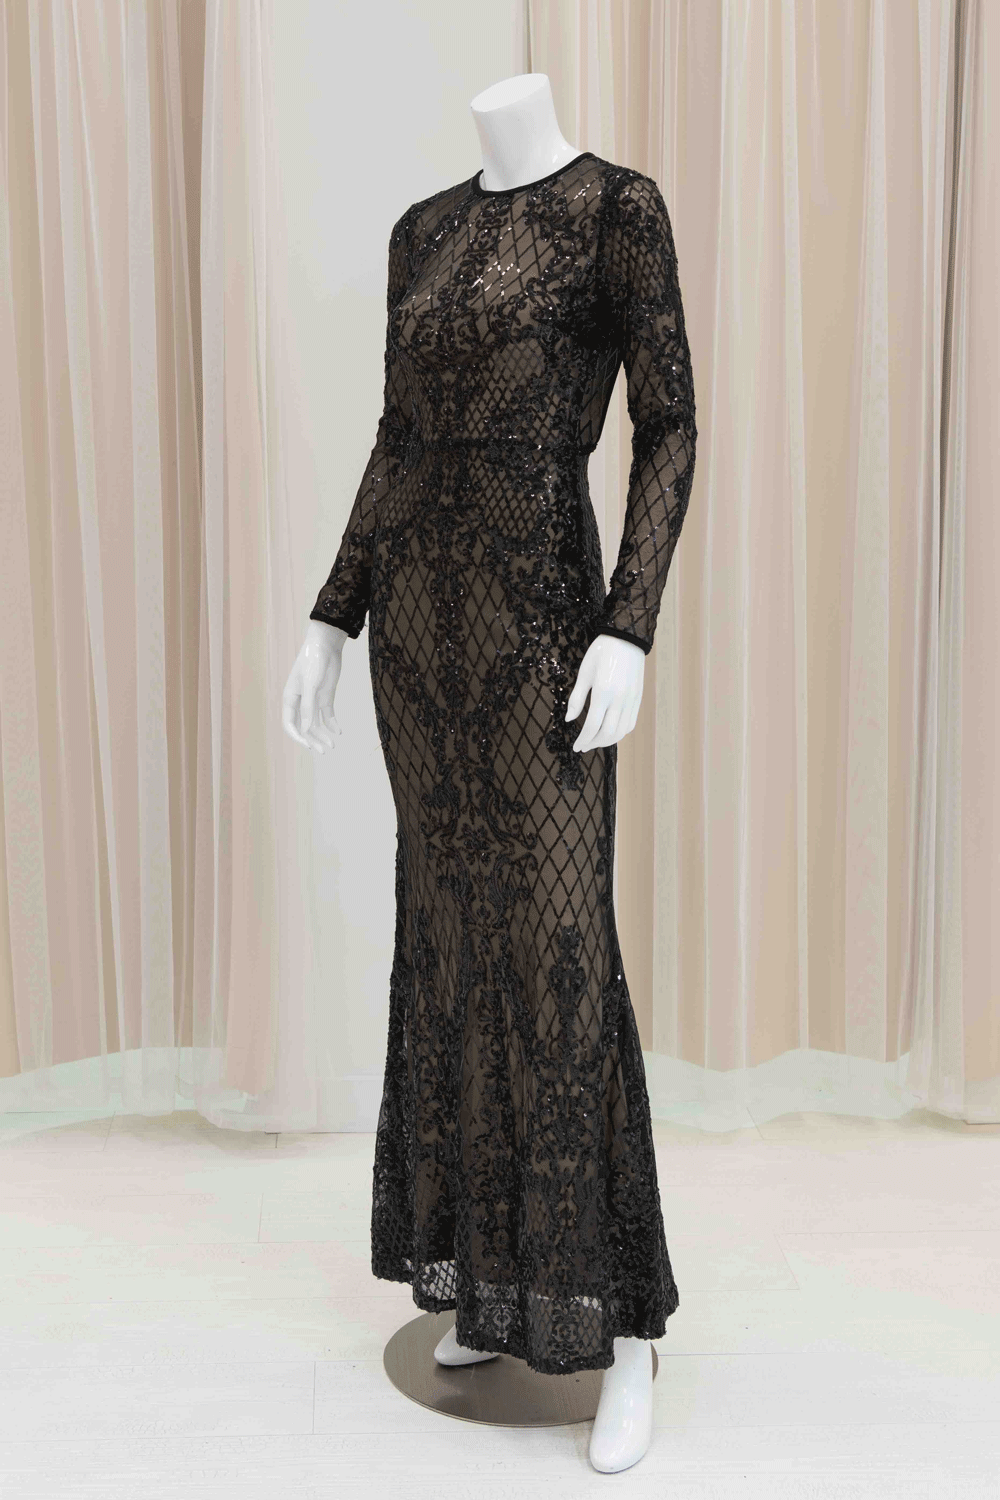 Sexy Sequin Long Sleeve Evening Gown for a Gala